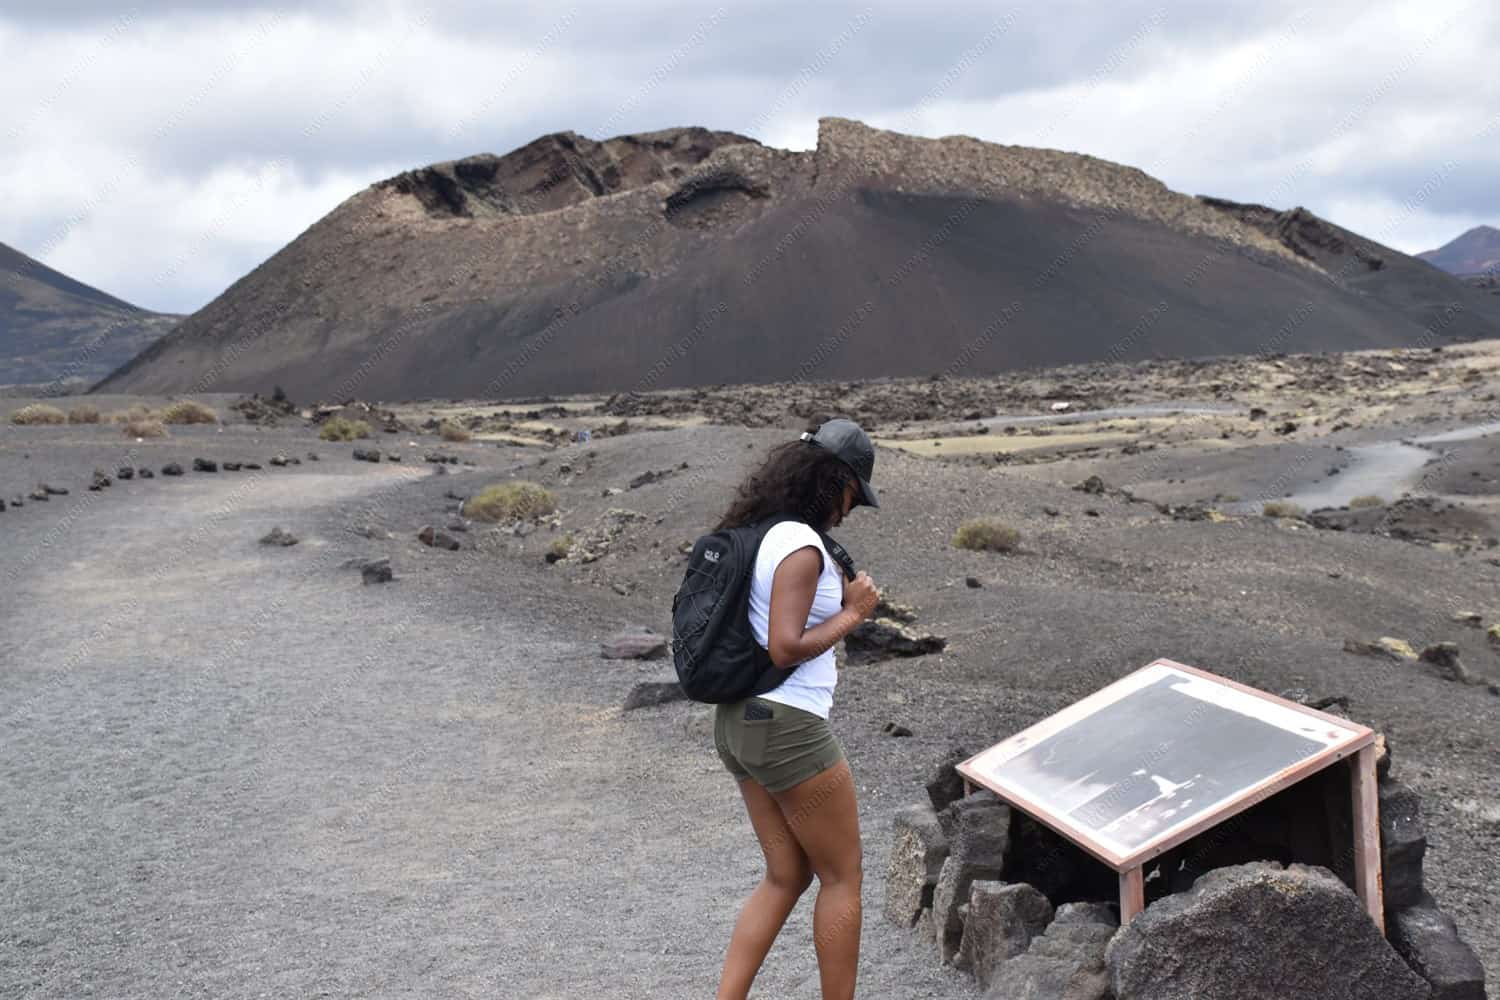 You are currently viewing Hiking at the Volcan el Cuervo, Lanzarote